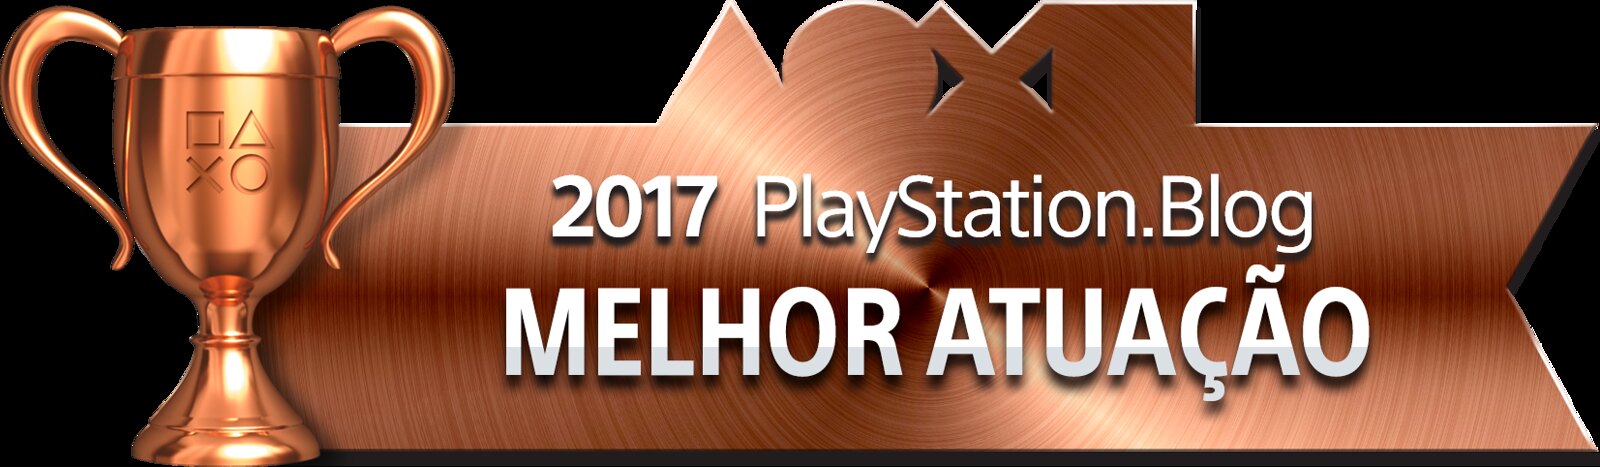 PlayStation Blog Game of the Year 2017 - Best Performance (Bronze)